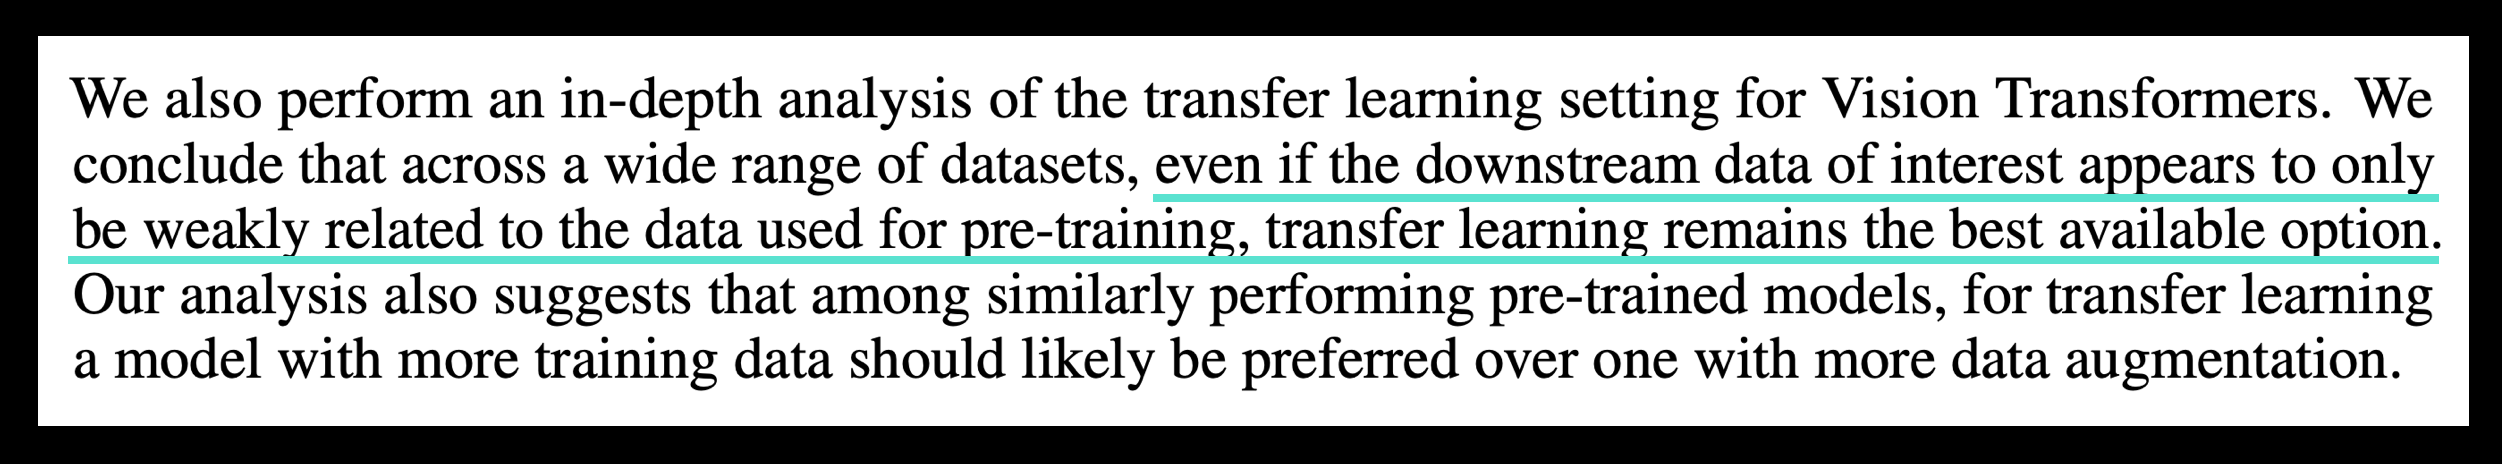 how to train your vision transformer paper section 6, advising to use transfer learning if you can